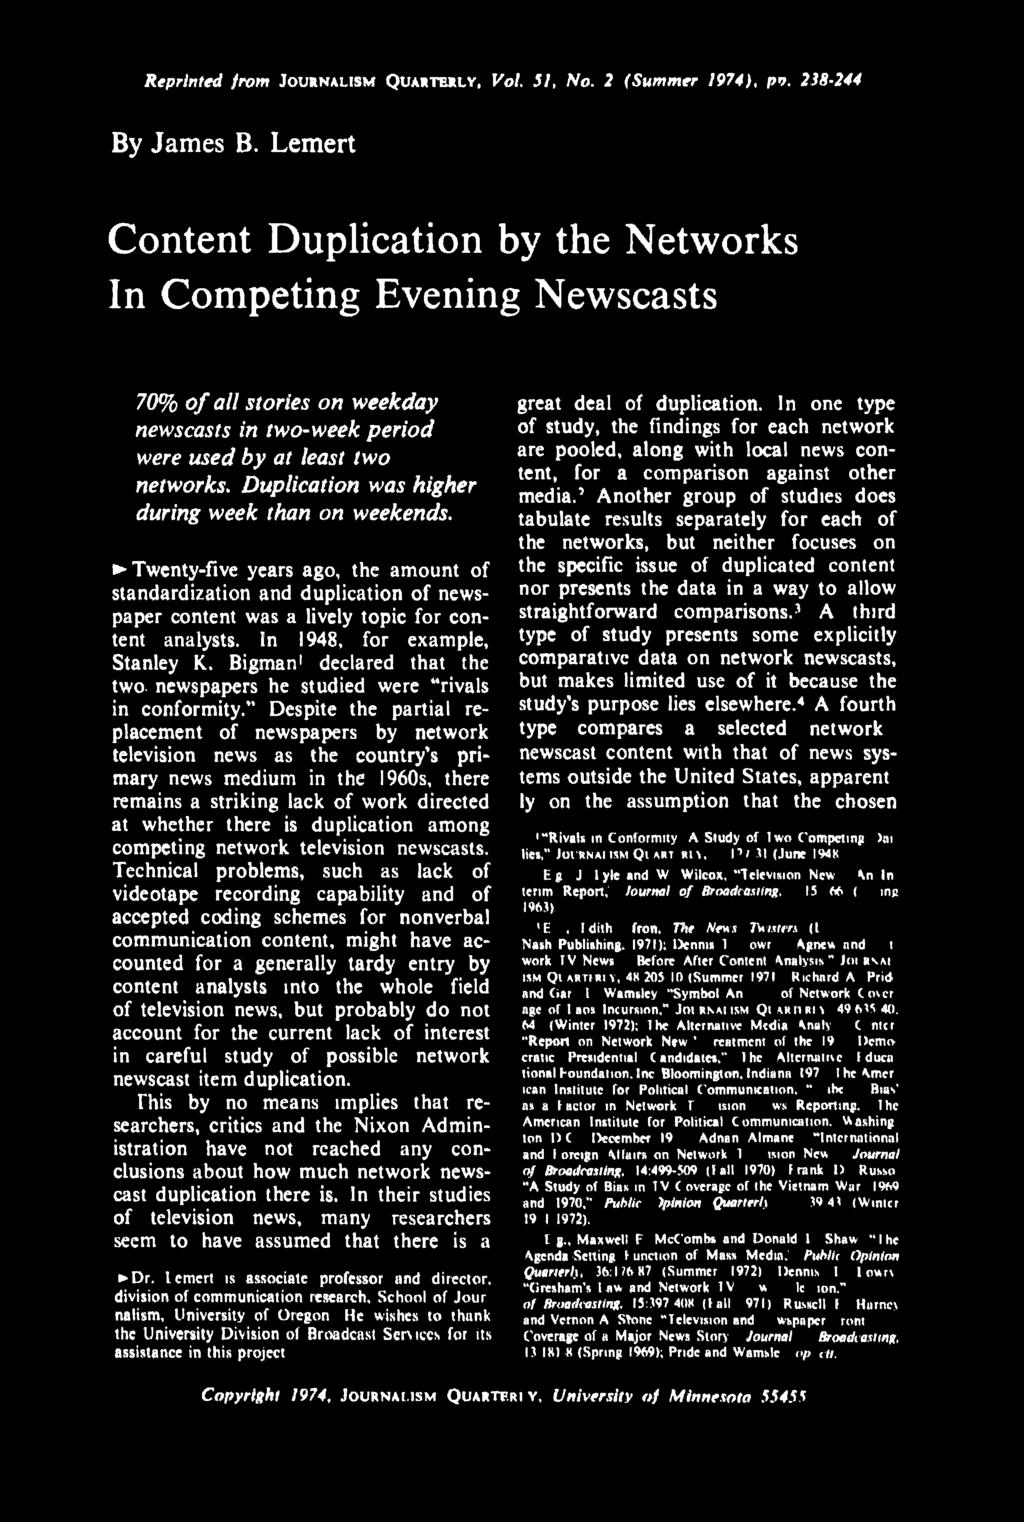 " Despite the partial replacement of newspapers by network television news as the country's primary news medium in the 1960s, there remains a striking lack of work directed at whether there is